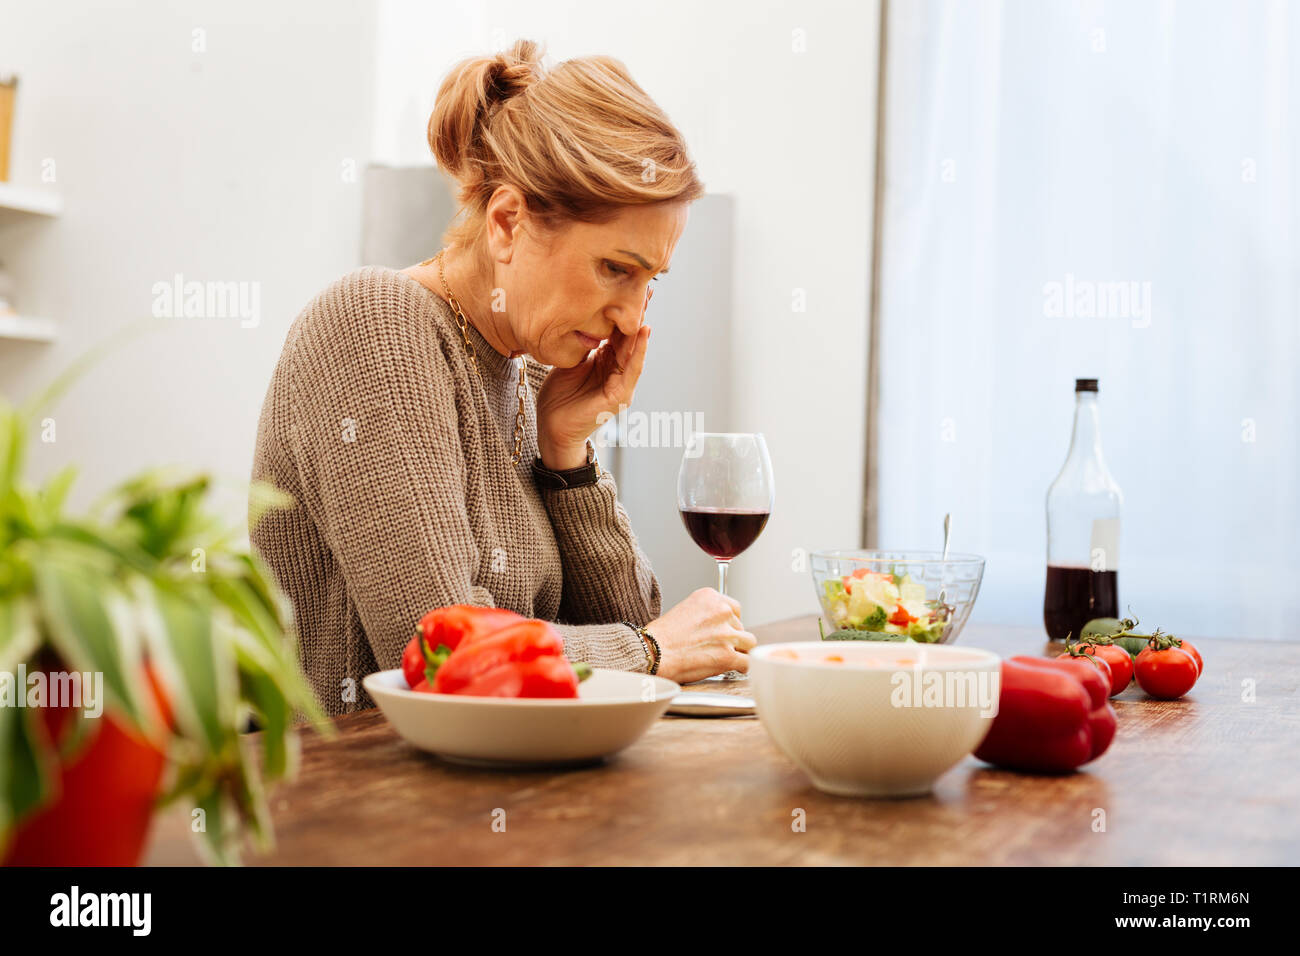 Distressed light-haired woman being depressed with her lifestyle Stock Photo